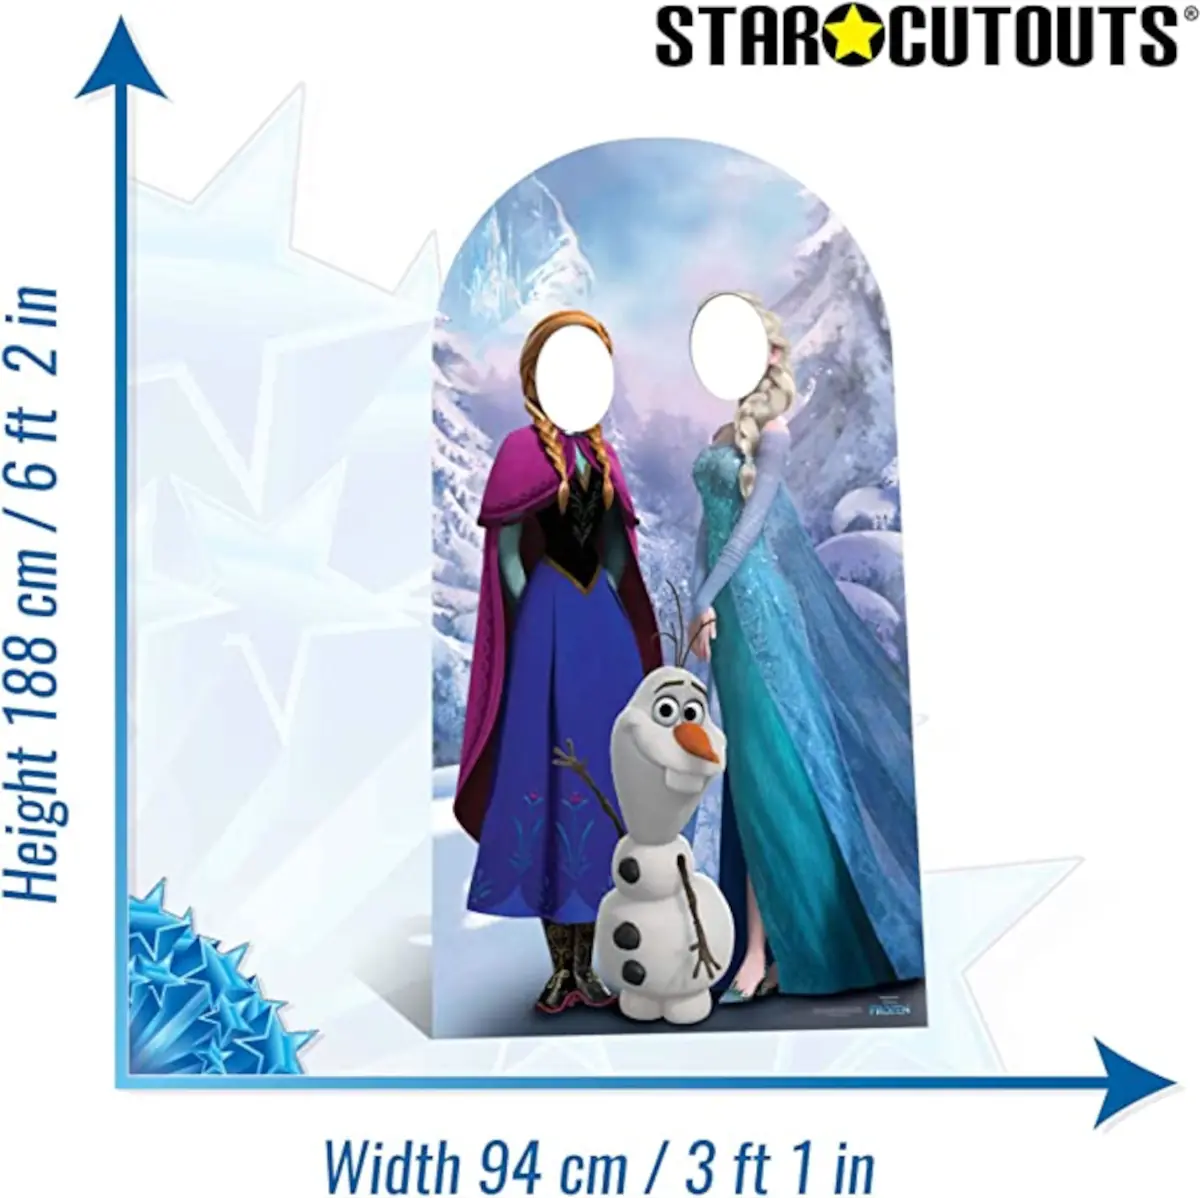 Anna and Elsa from Frozen Disney Cardboard Cutout / Standee